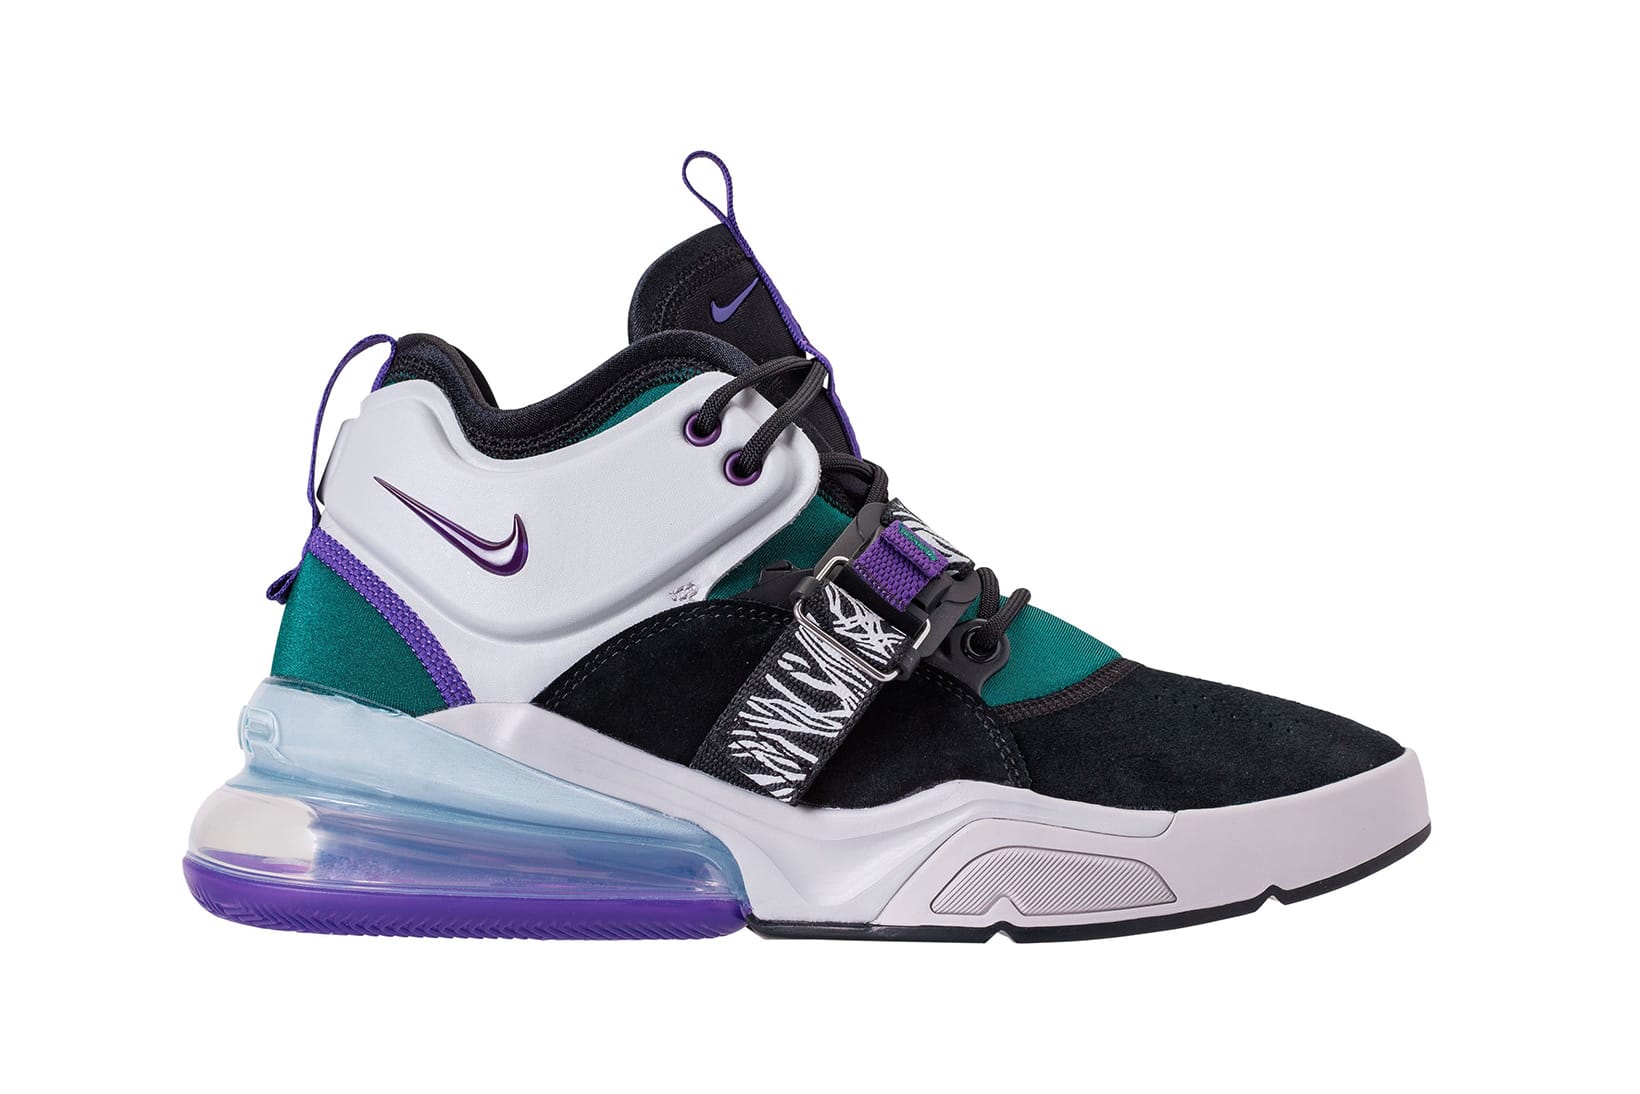 teal and purple nikes